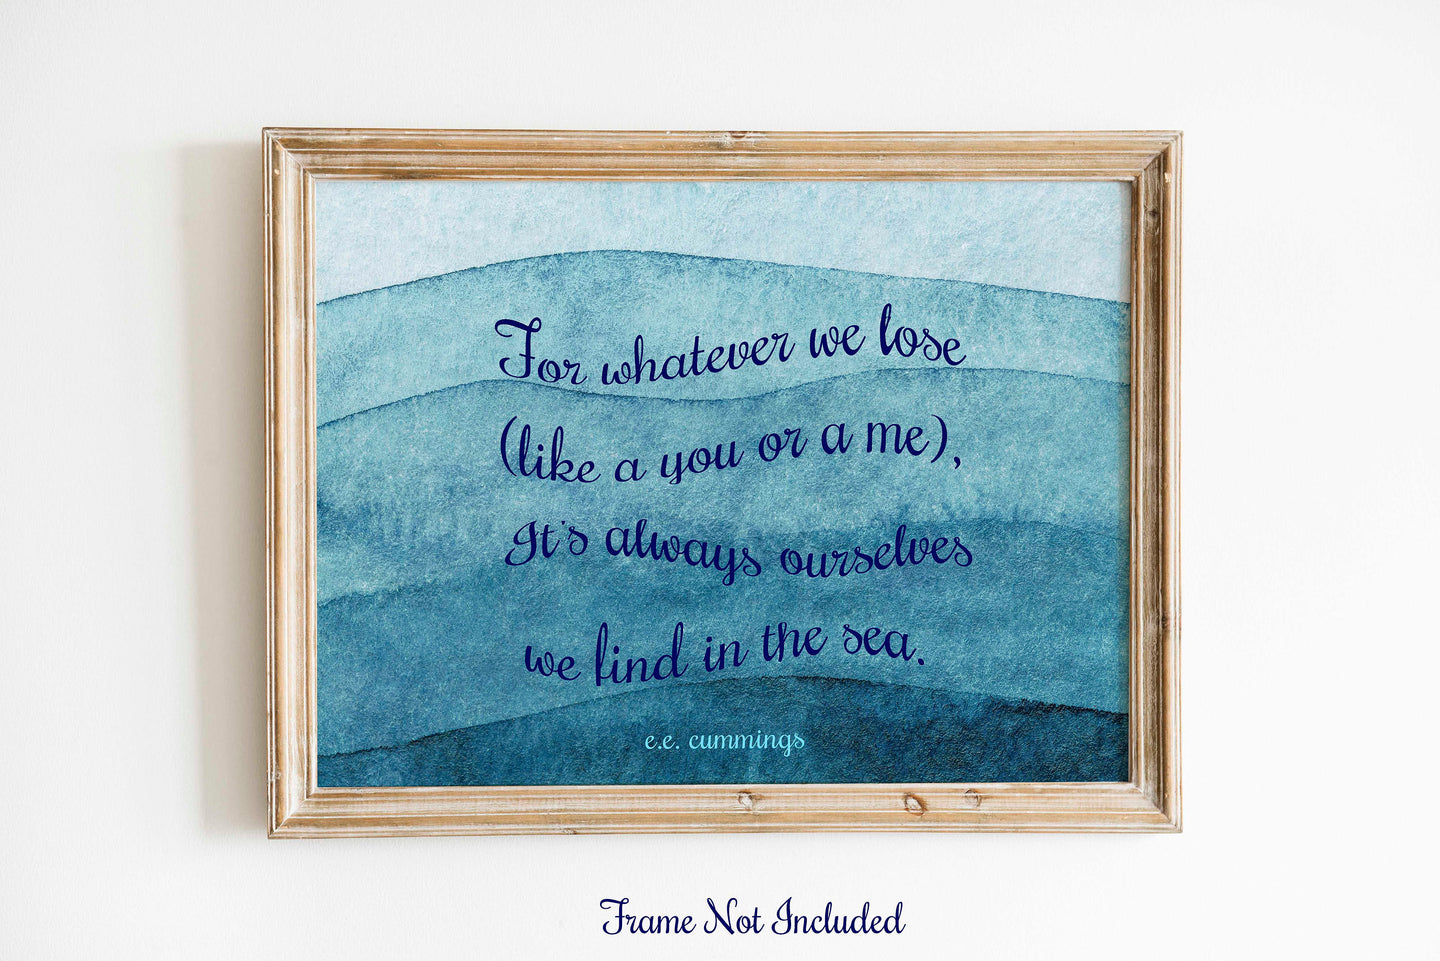 Cummings Poem - For whatever we lose - Beach Decor - poetry wall art - Our self we find in the sea UNFRAMED